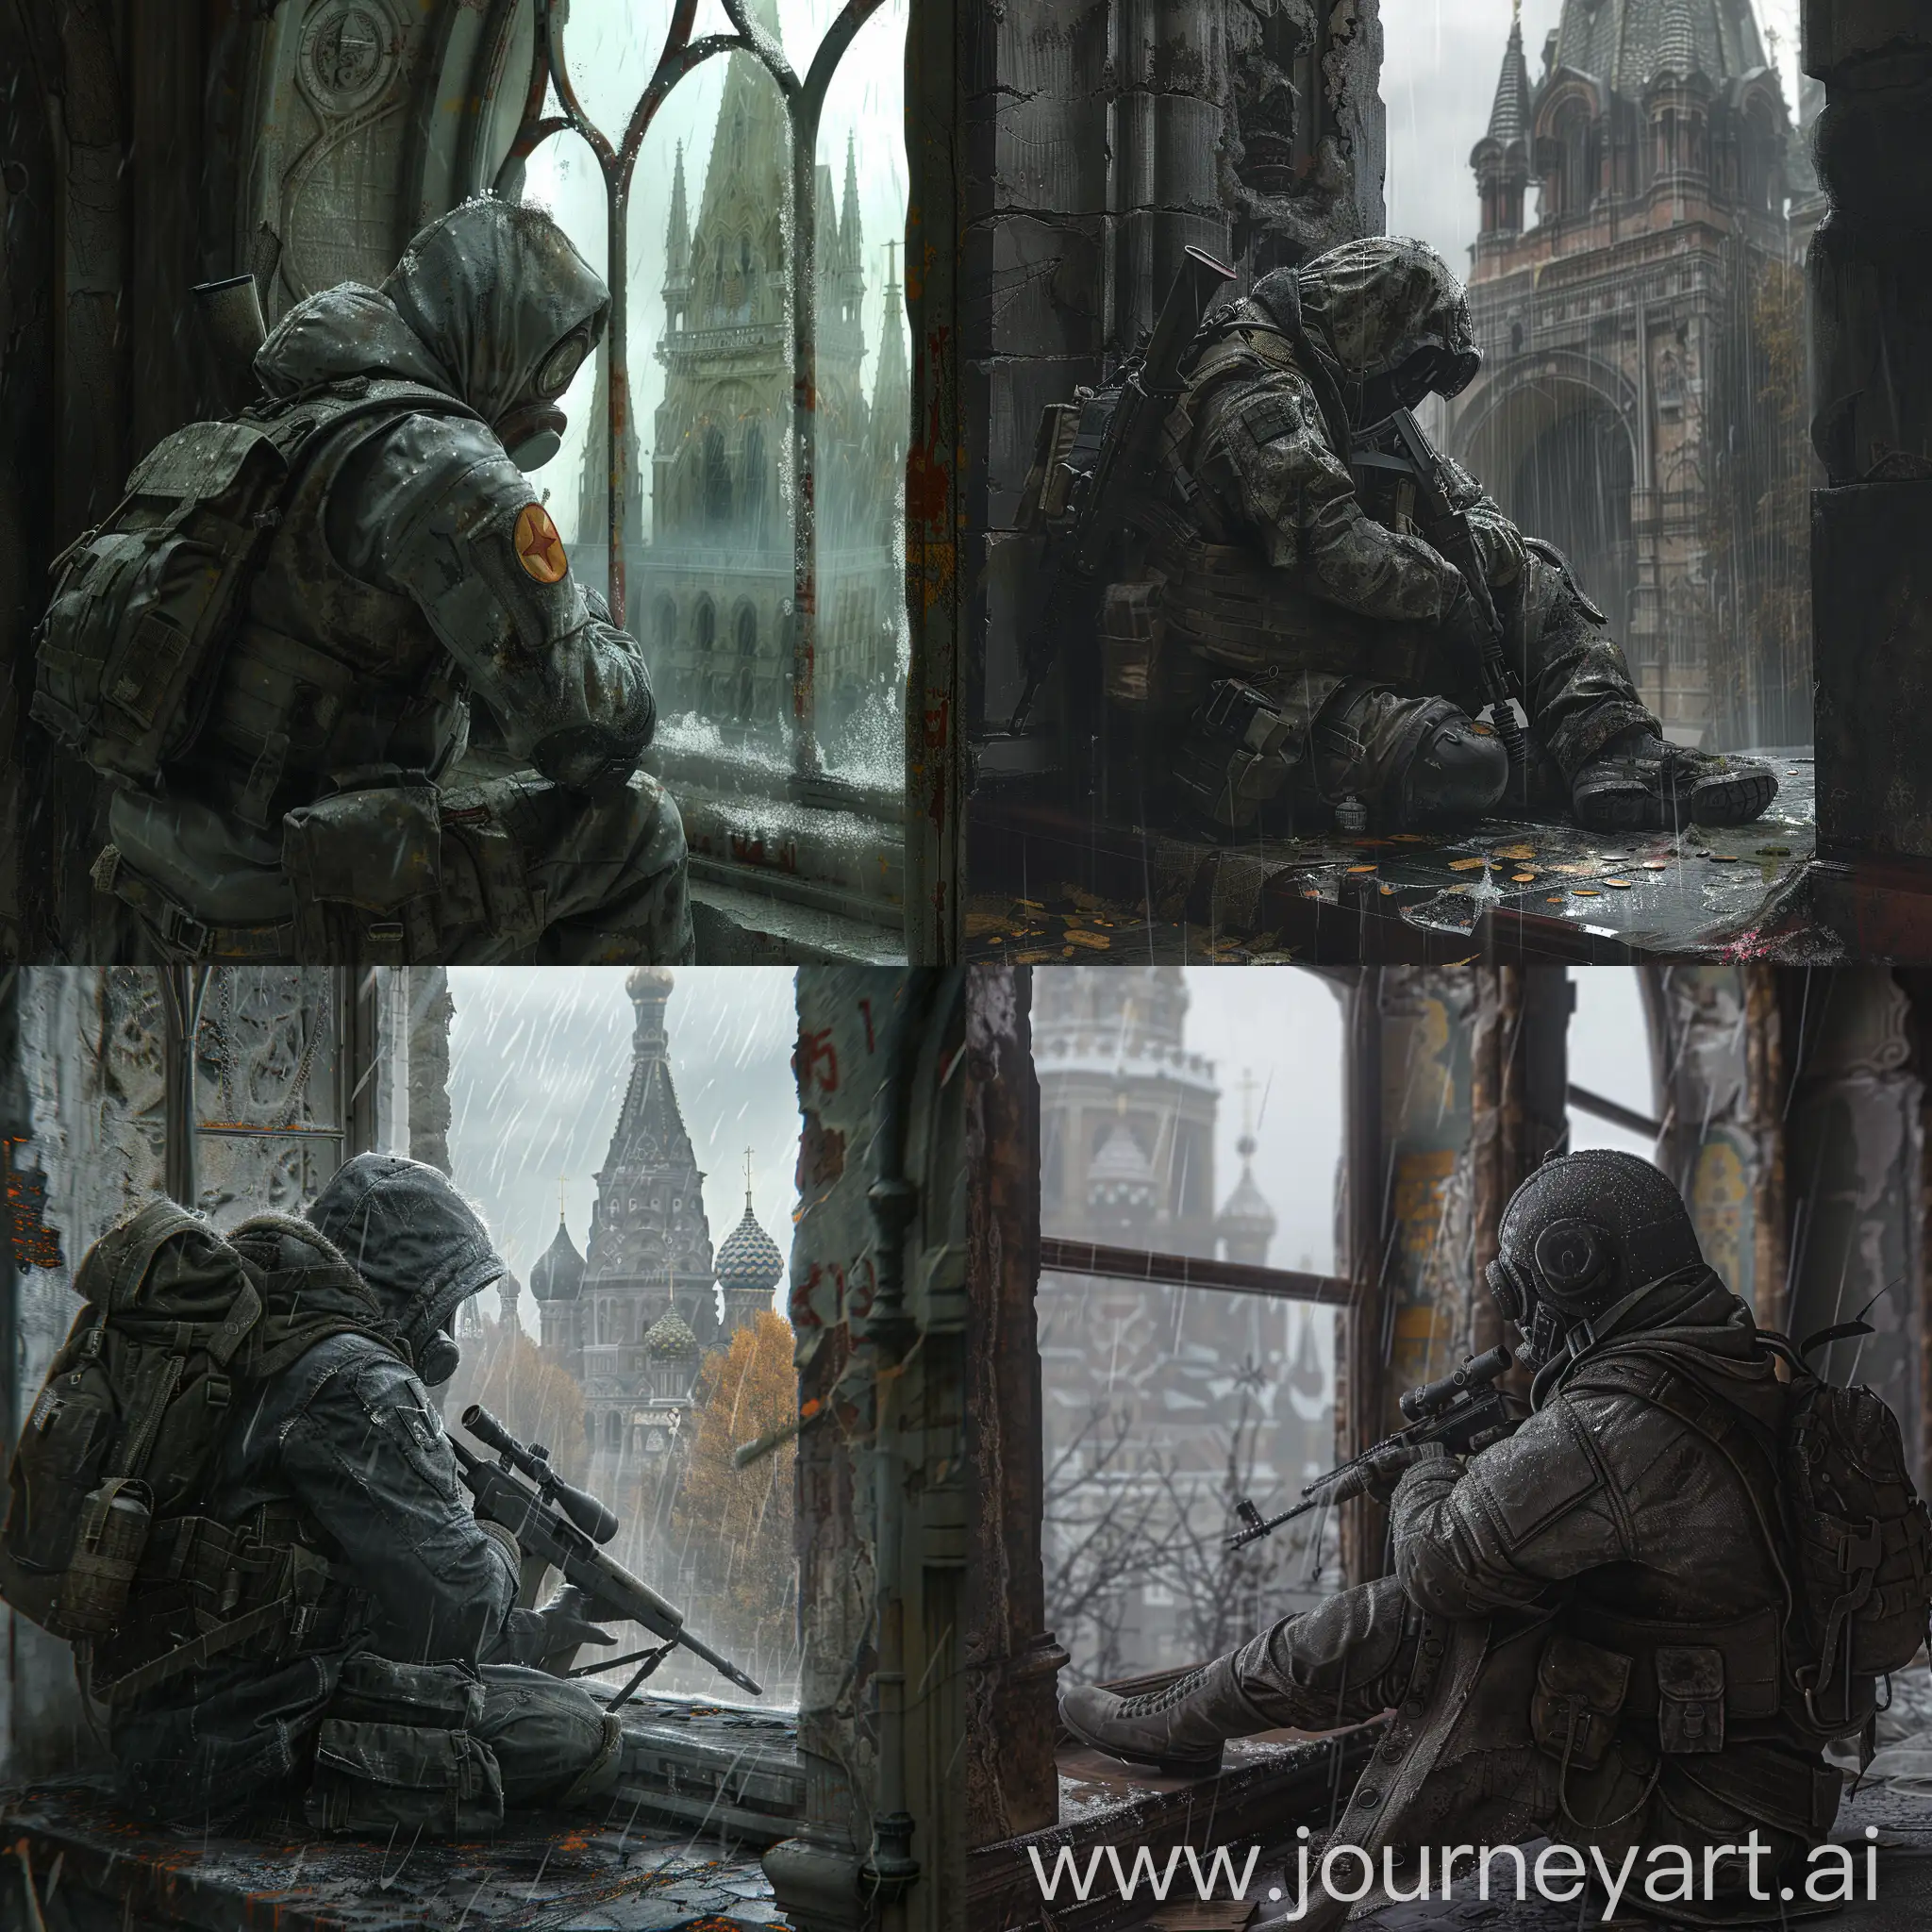 Stalker-in-Gray-Padded-Jacket-Aiming-from-Abandoned-Moscow-Cathedral